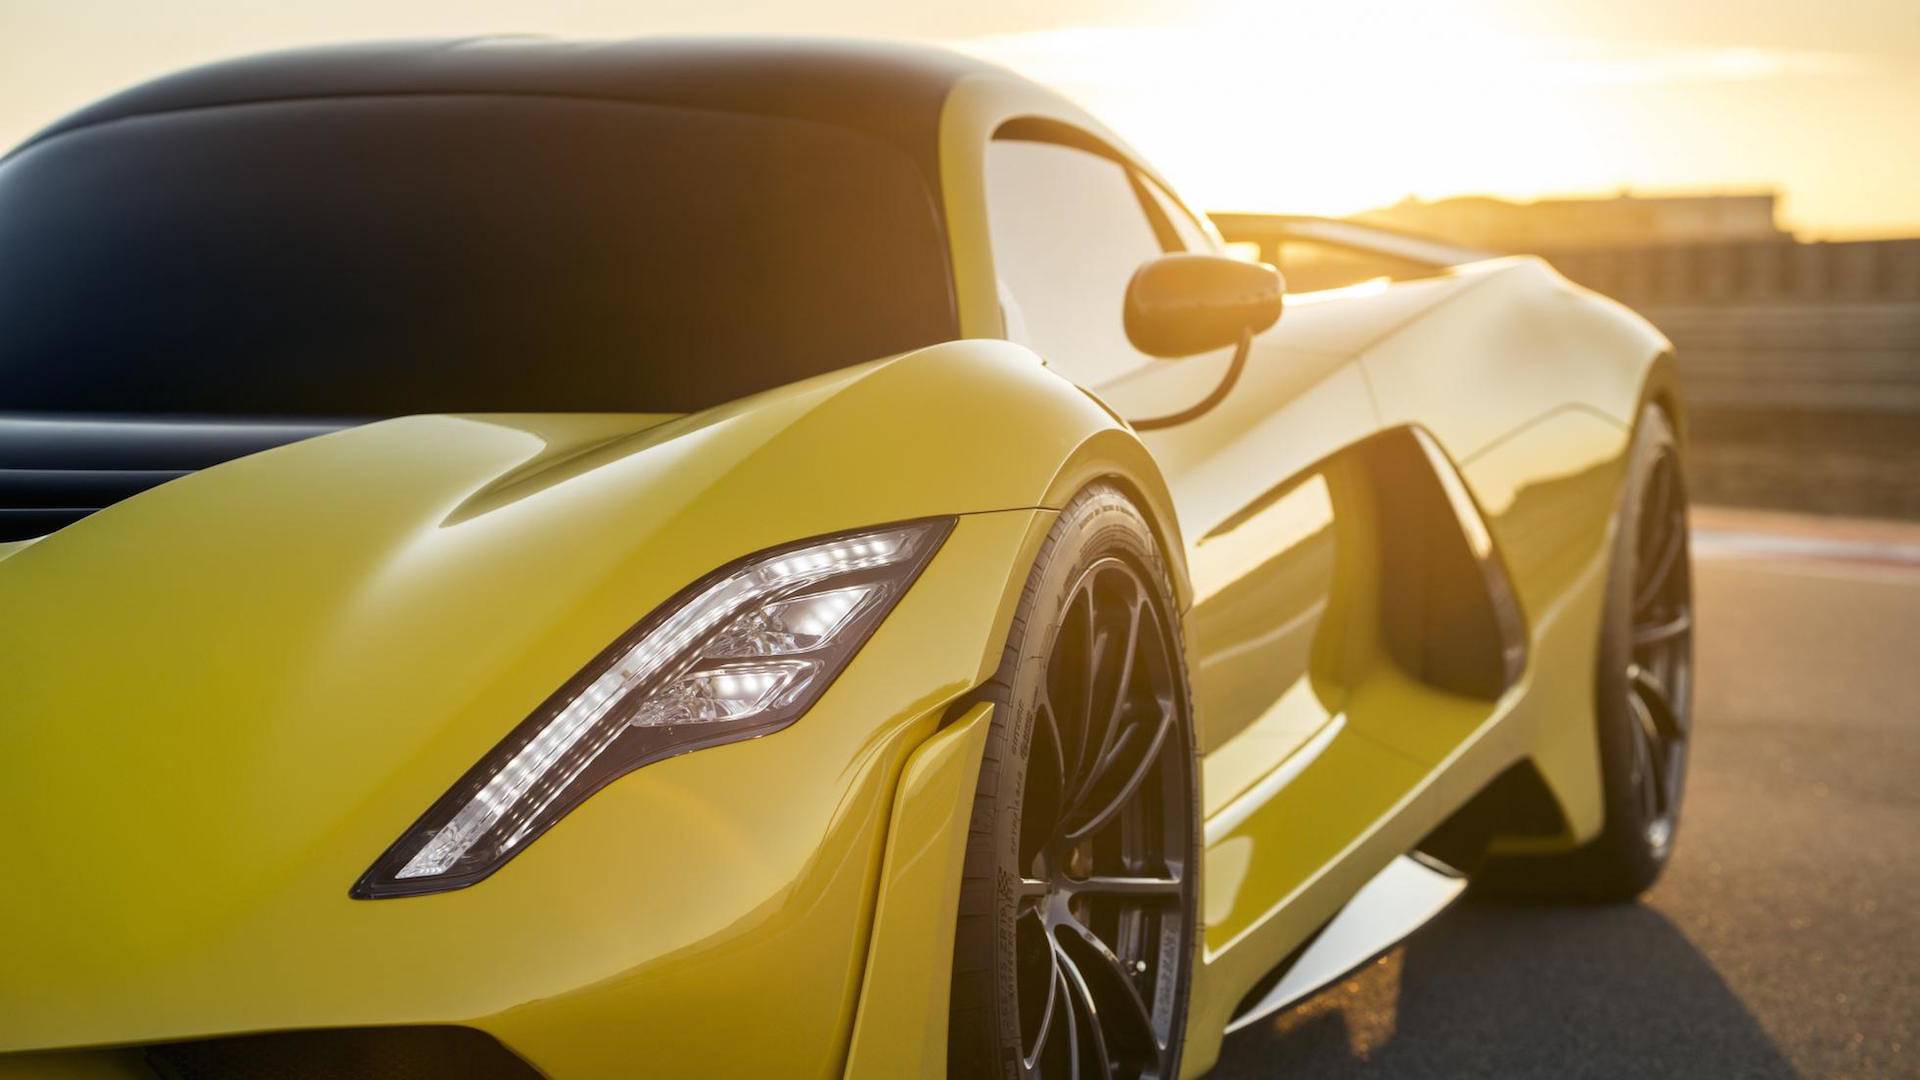 The 301-MPH Hennessey Venom F5 Is America’s Ultimate Hypercar